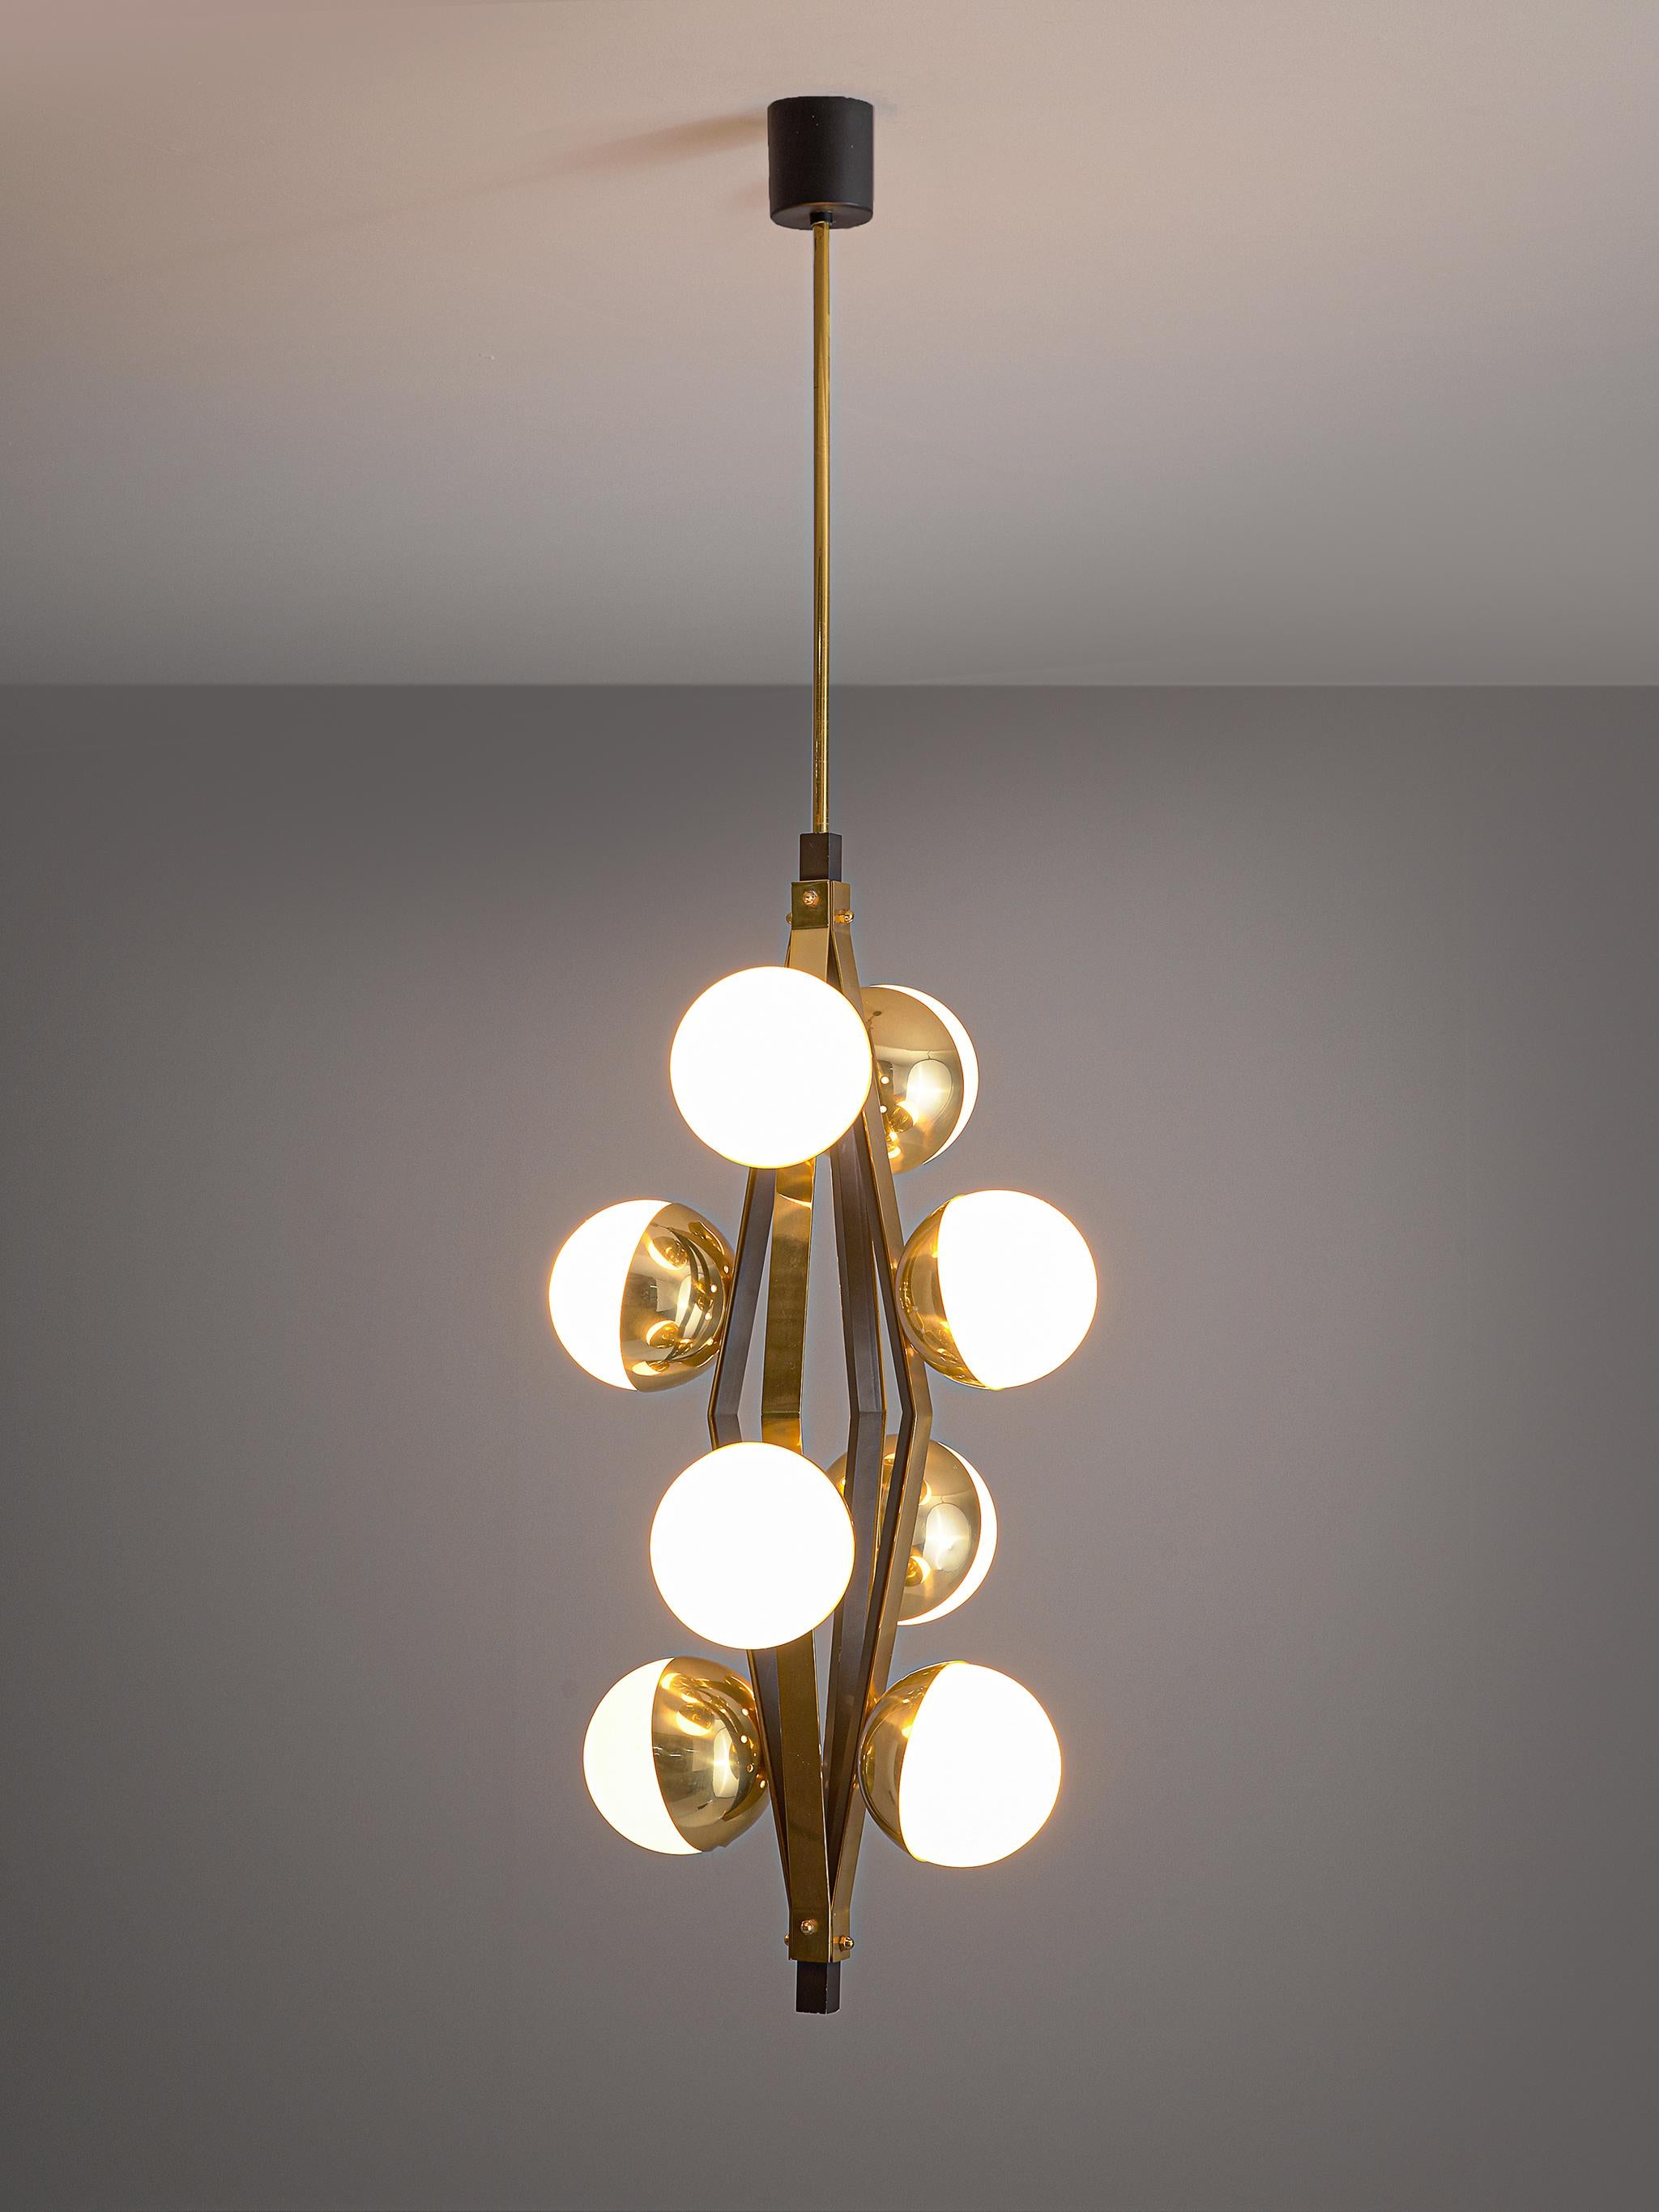 Chandelier, brass and opaline glass, Italy, 1950s.

Well designed chandelier from Italy, attributed to Stilnovo. The bulbs are held in place by brass bowls that are attached to a brass stroke. The pendant light consists of 4 strokes that are